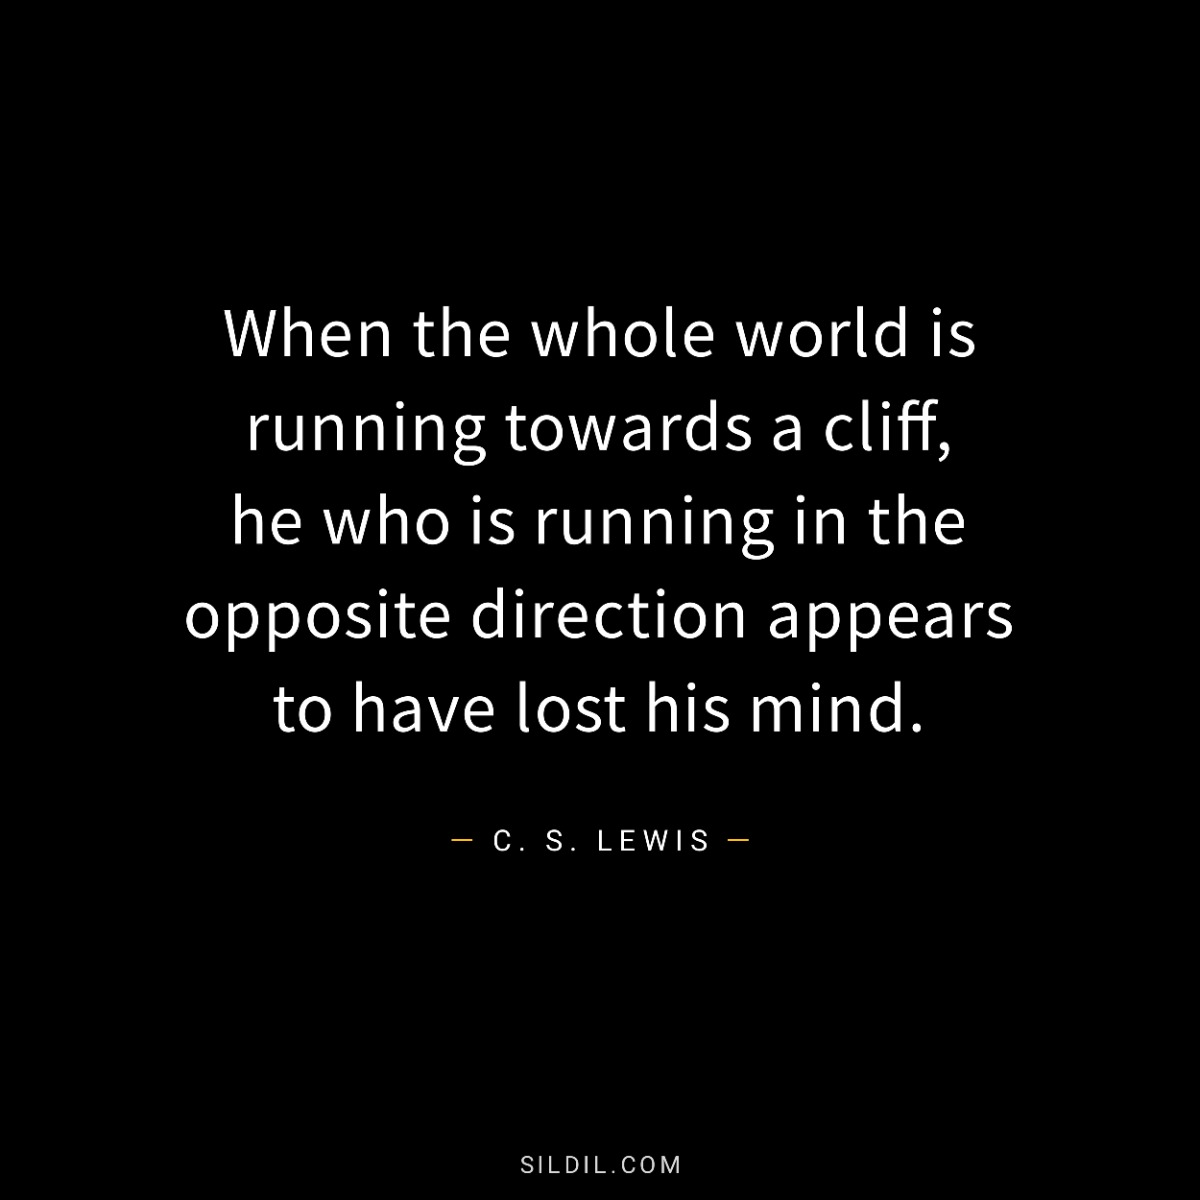 When the whole world is running towards a cliff, he who is running in the opposite direction appears to have lost his mind.